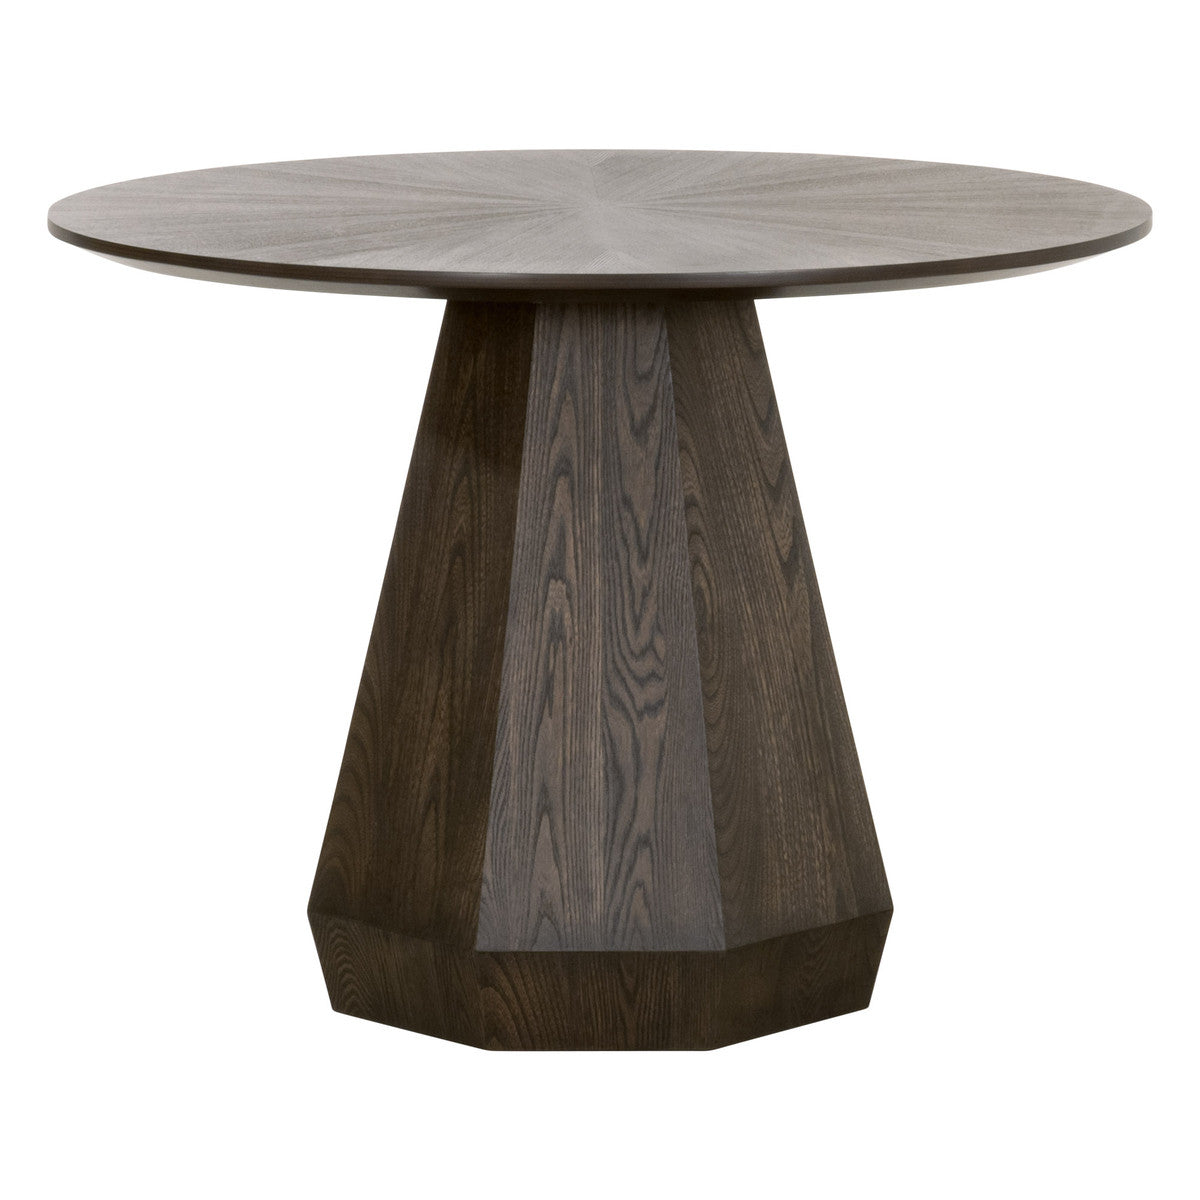 Colin 42" Round Dining Table